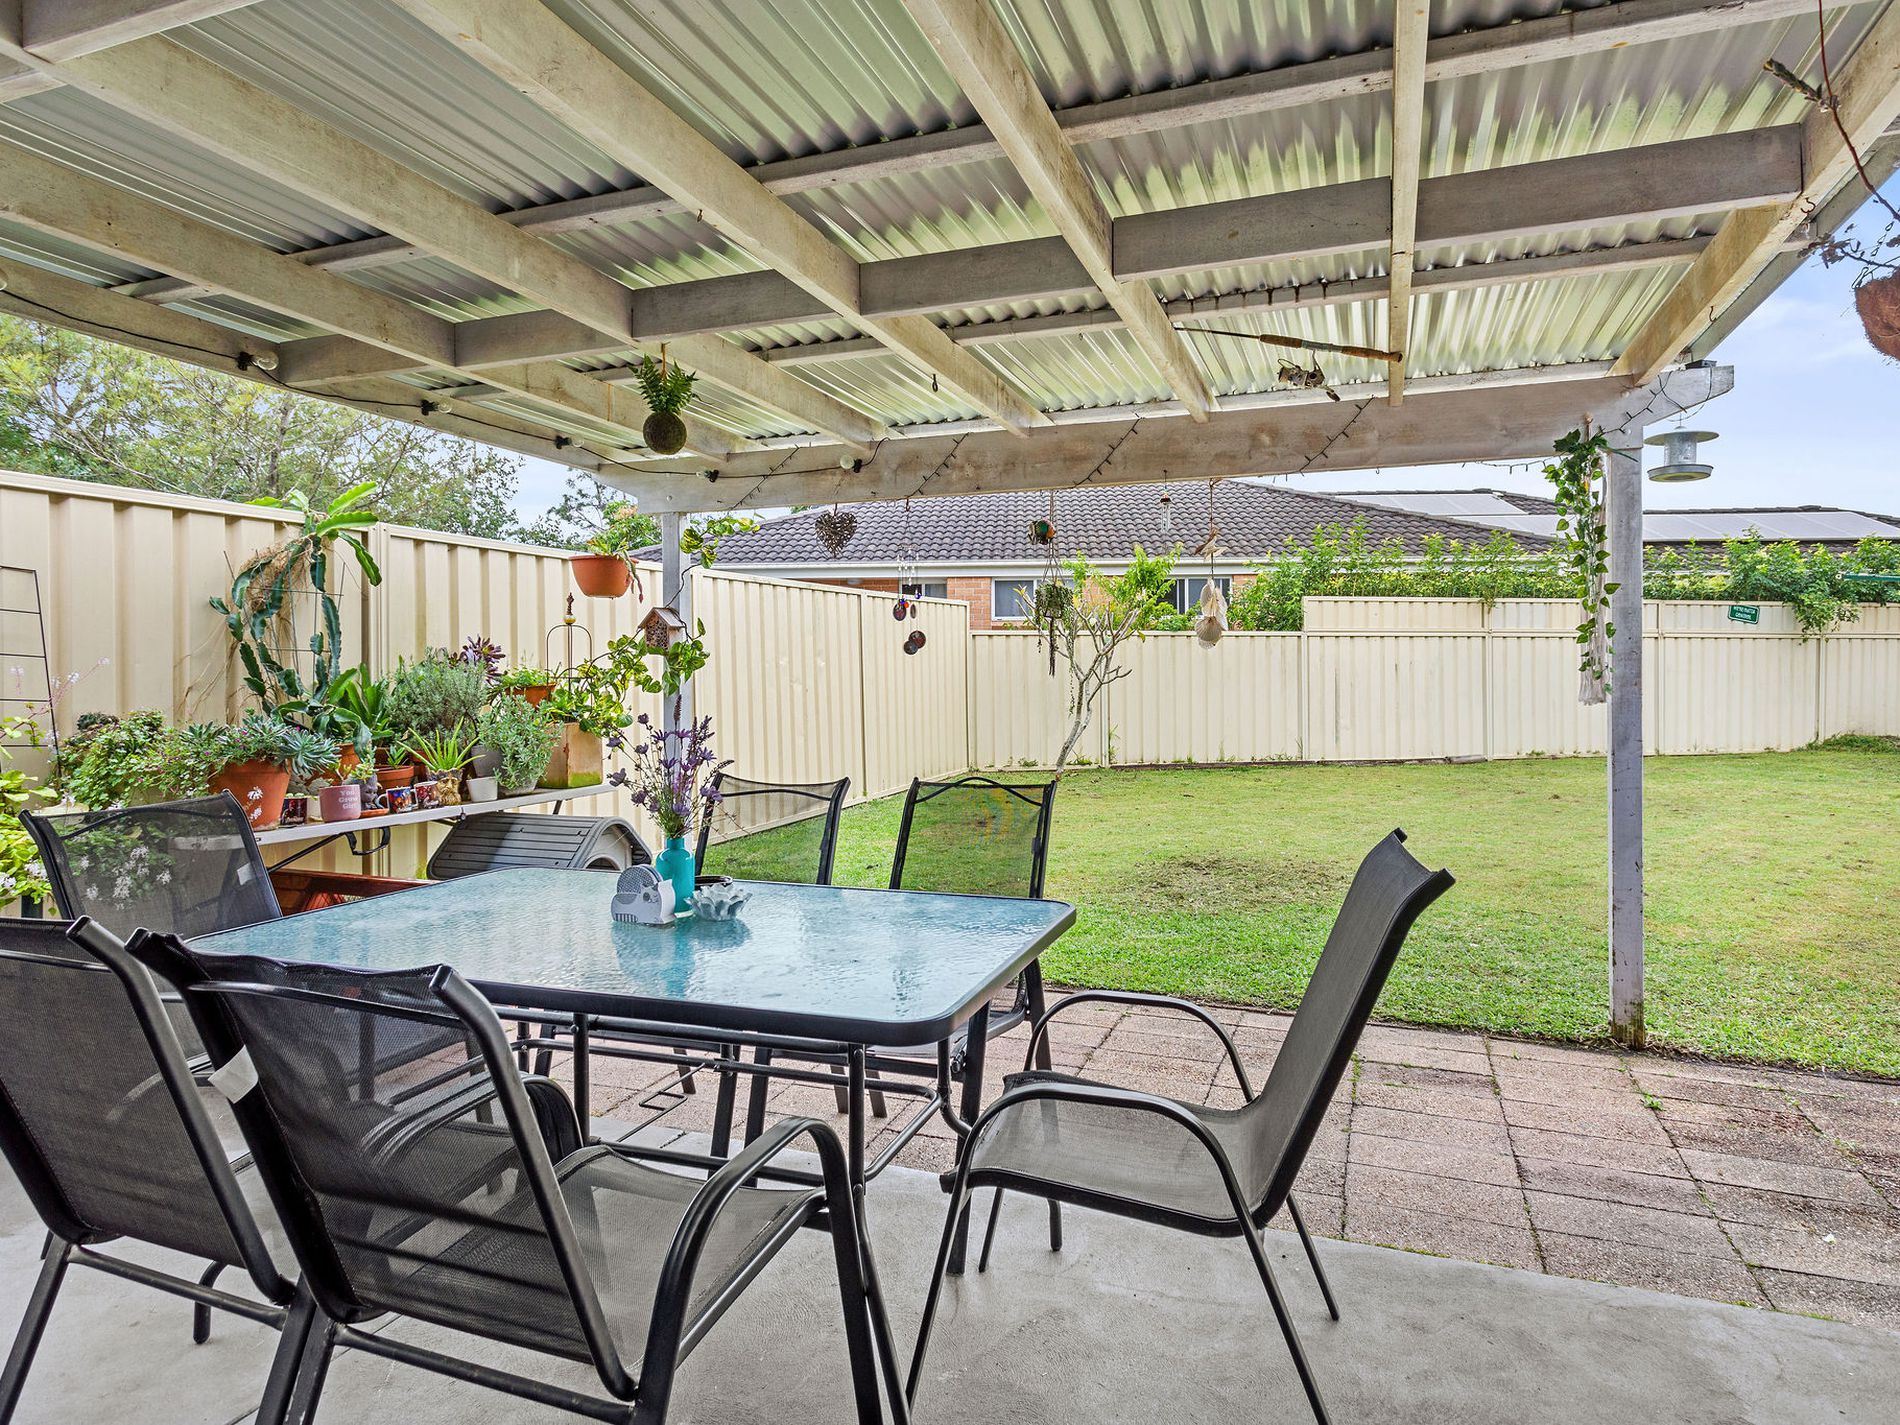 48 THE LAKES WAY, Forster